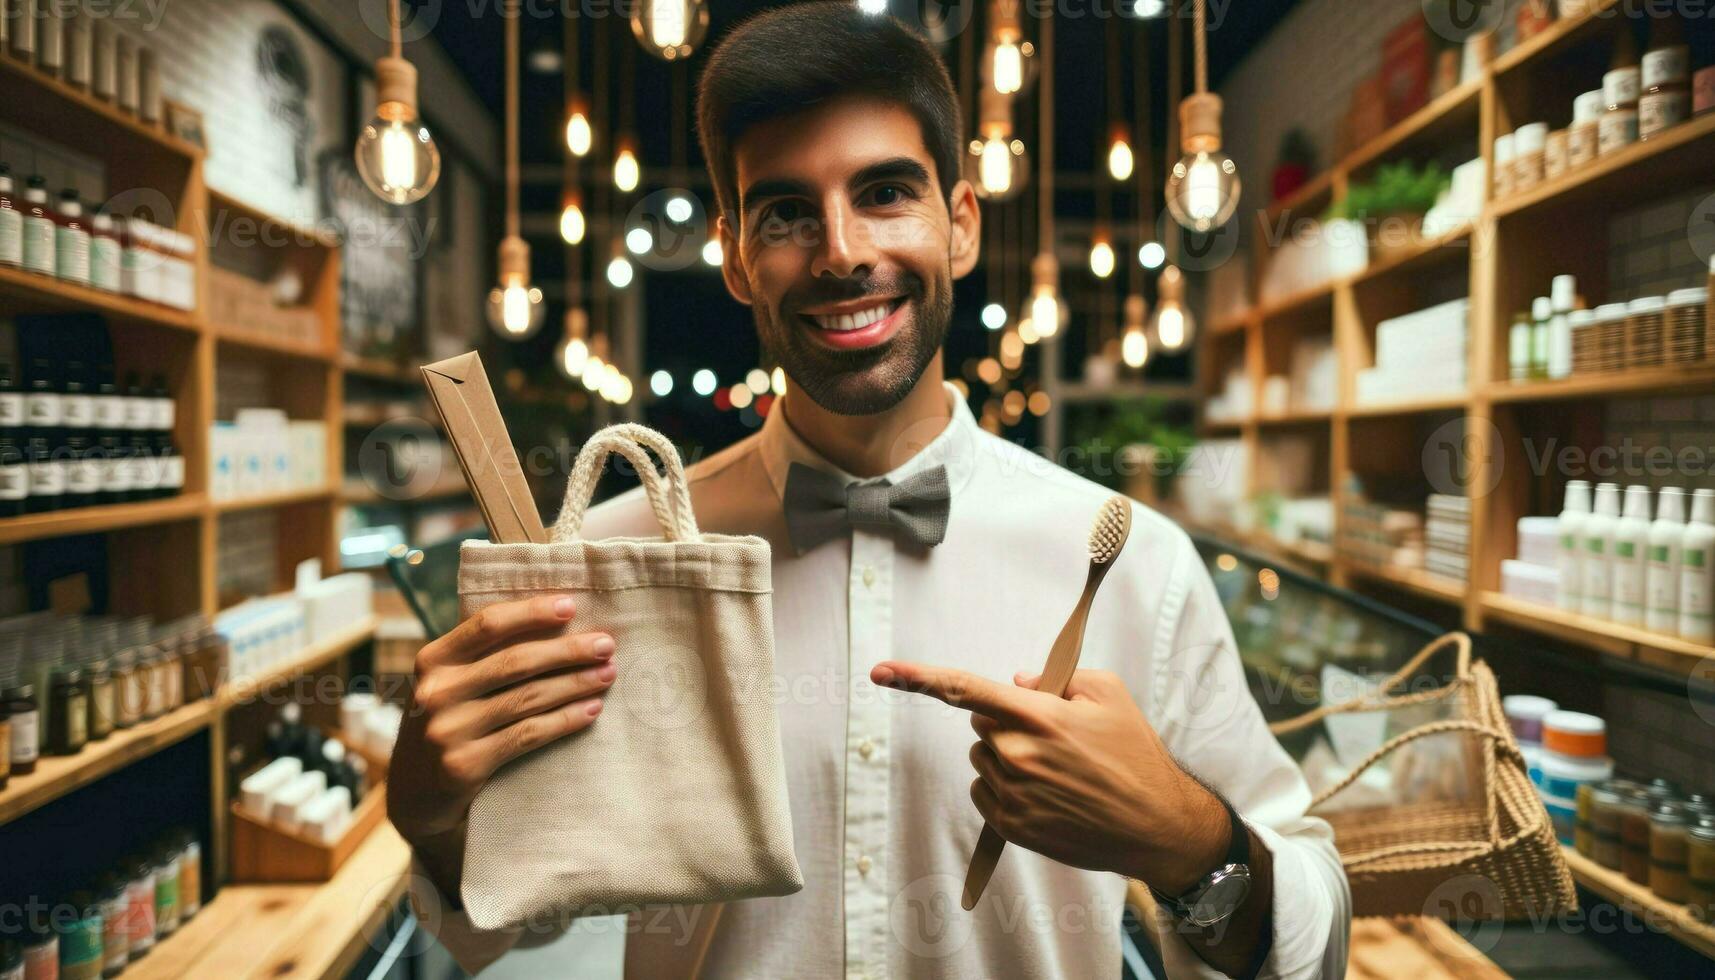 AI generated Photo capturing a business owner of Hispanic descent, male, in an indoor setting, proudly displaying products with reusable packaging.